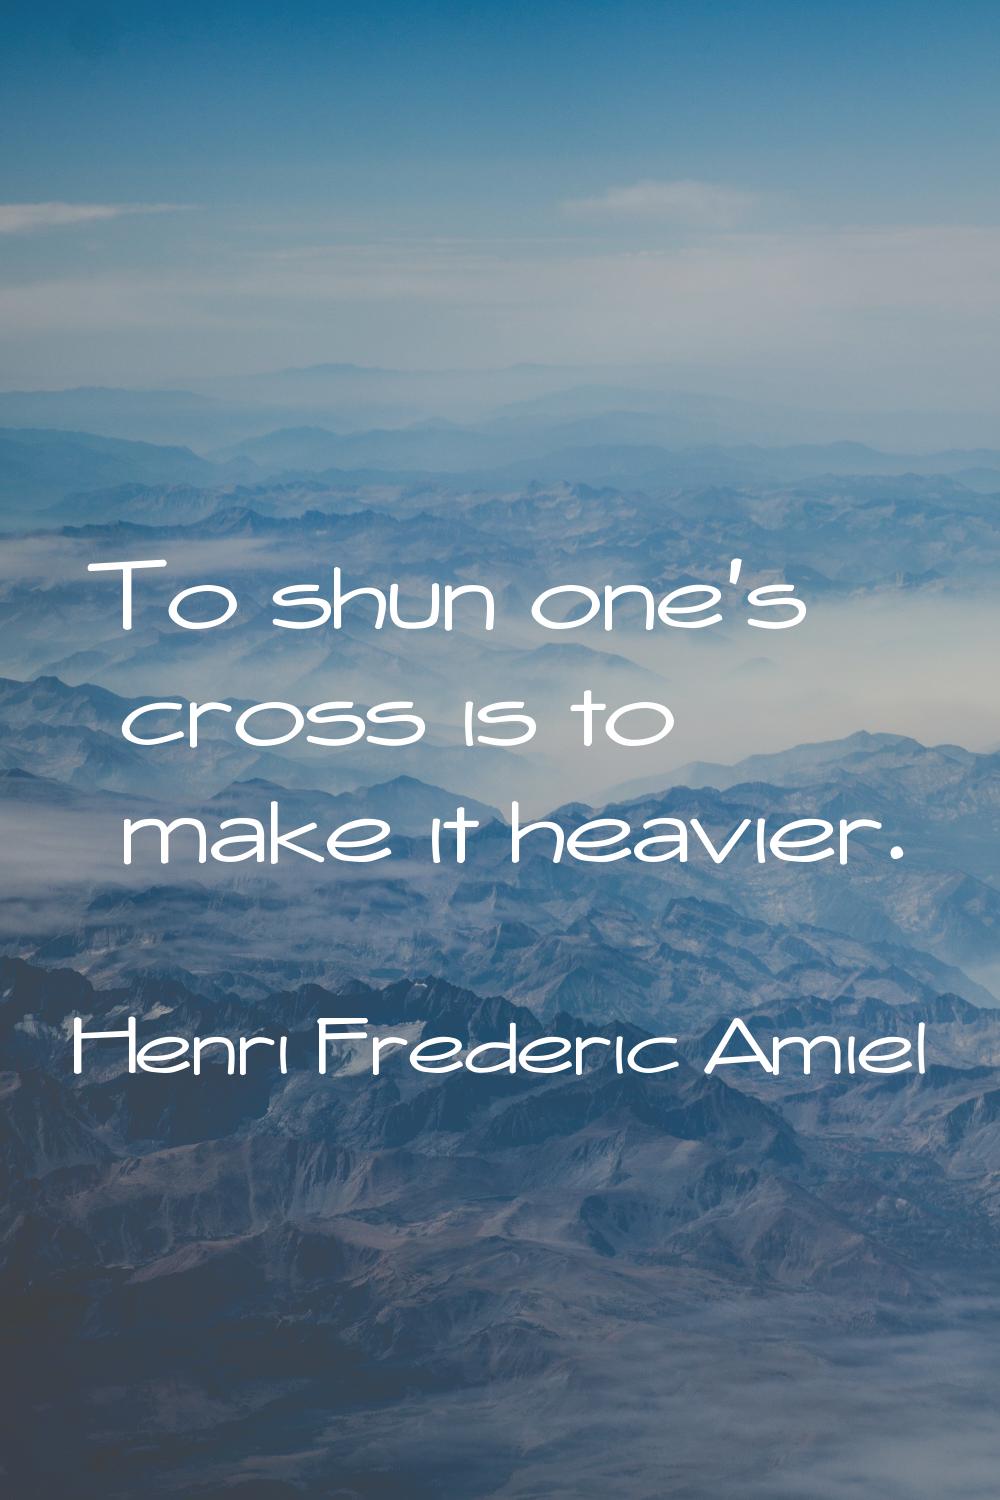 To shun one's cross is to make it heavier.